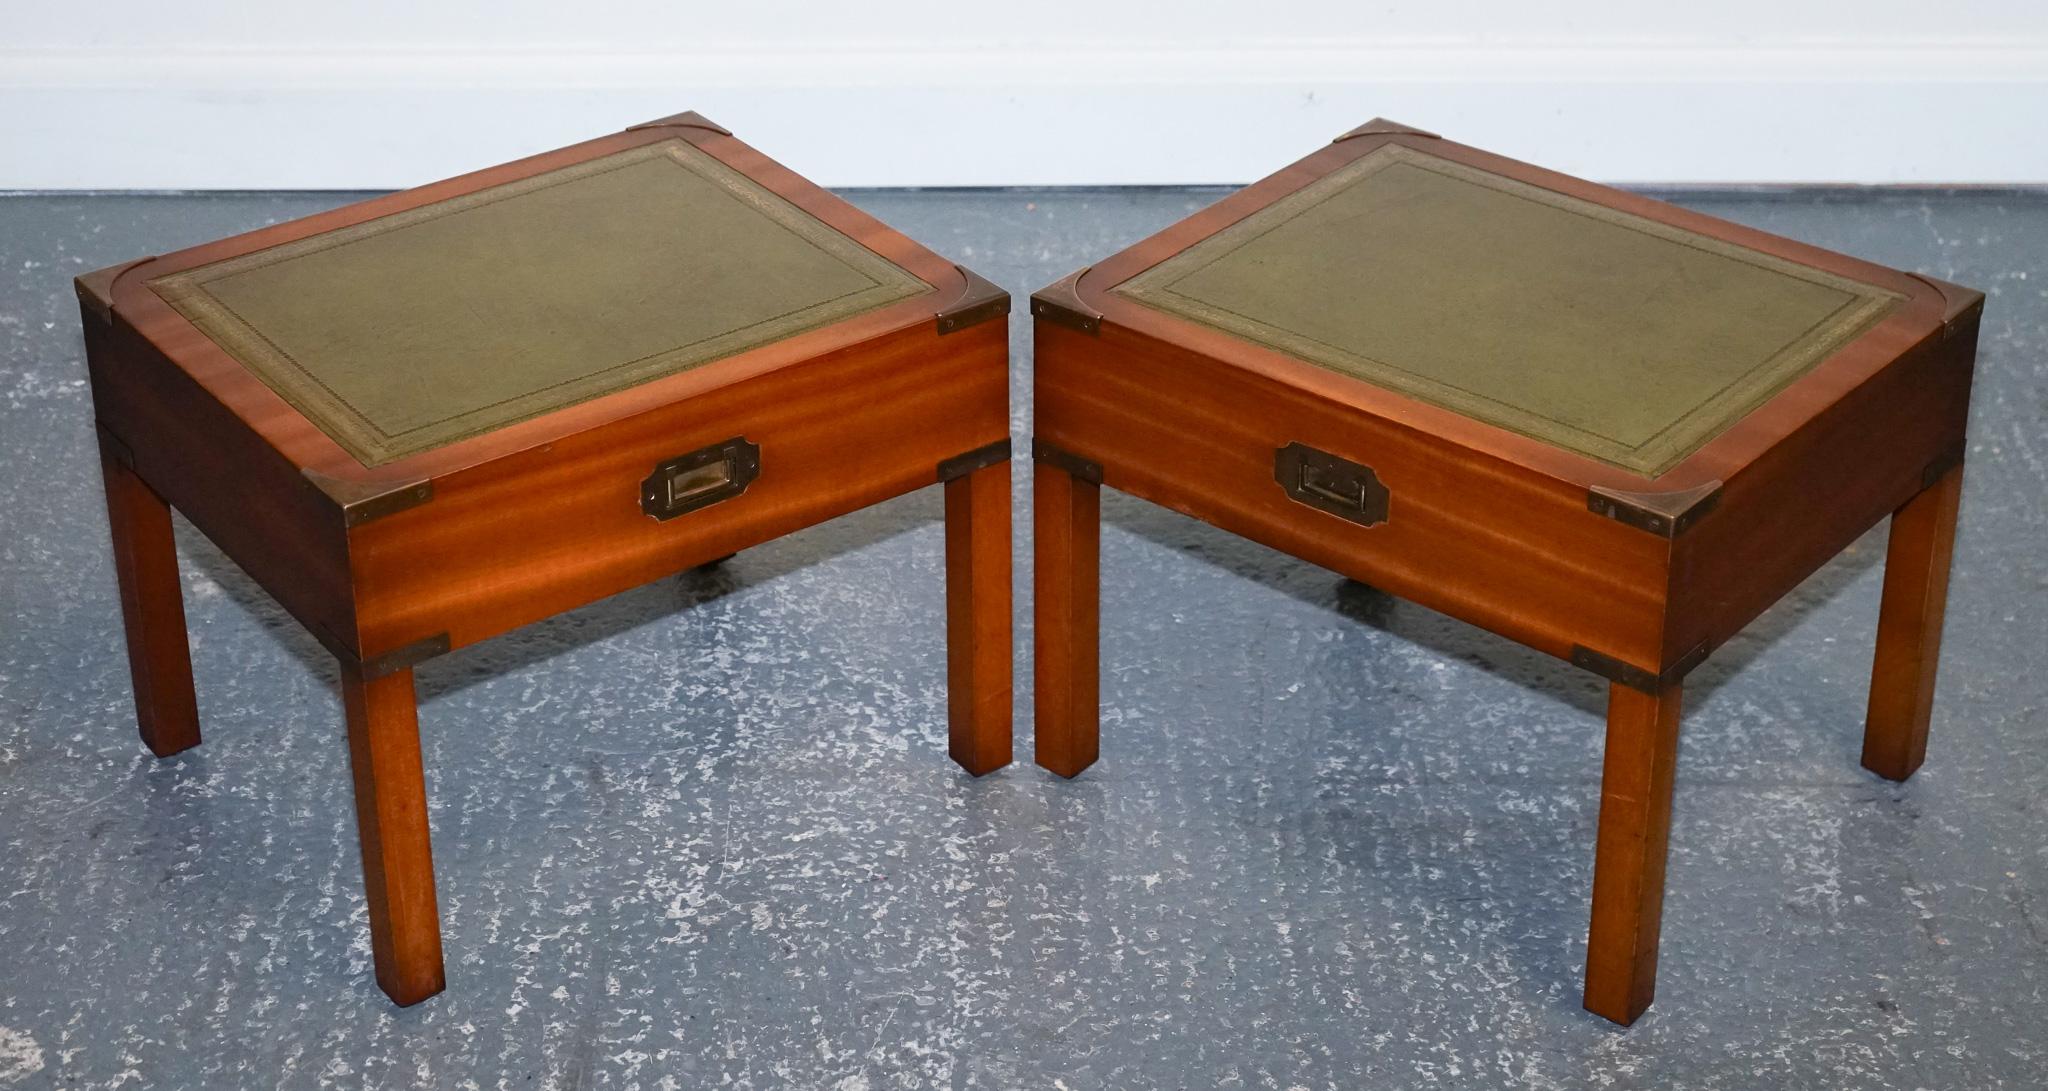 BEVAN FUNNELL COFFEE TABLE WITH TWO SiDE UNDER TABLES GREEN LEATHER TOP For Sale 4